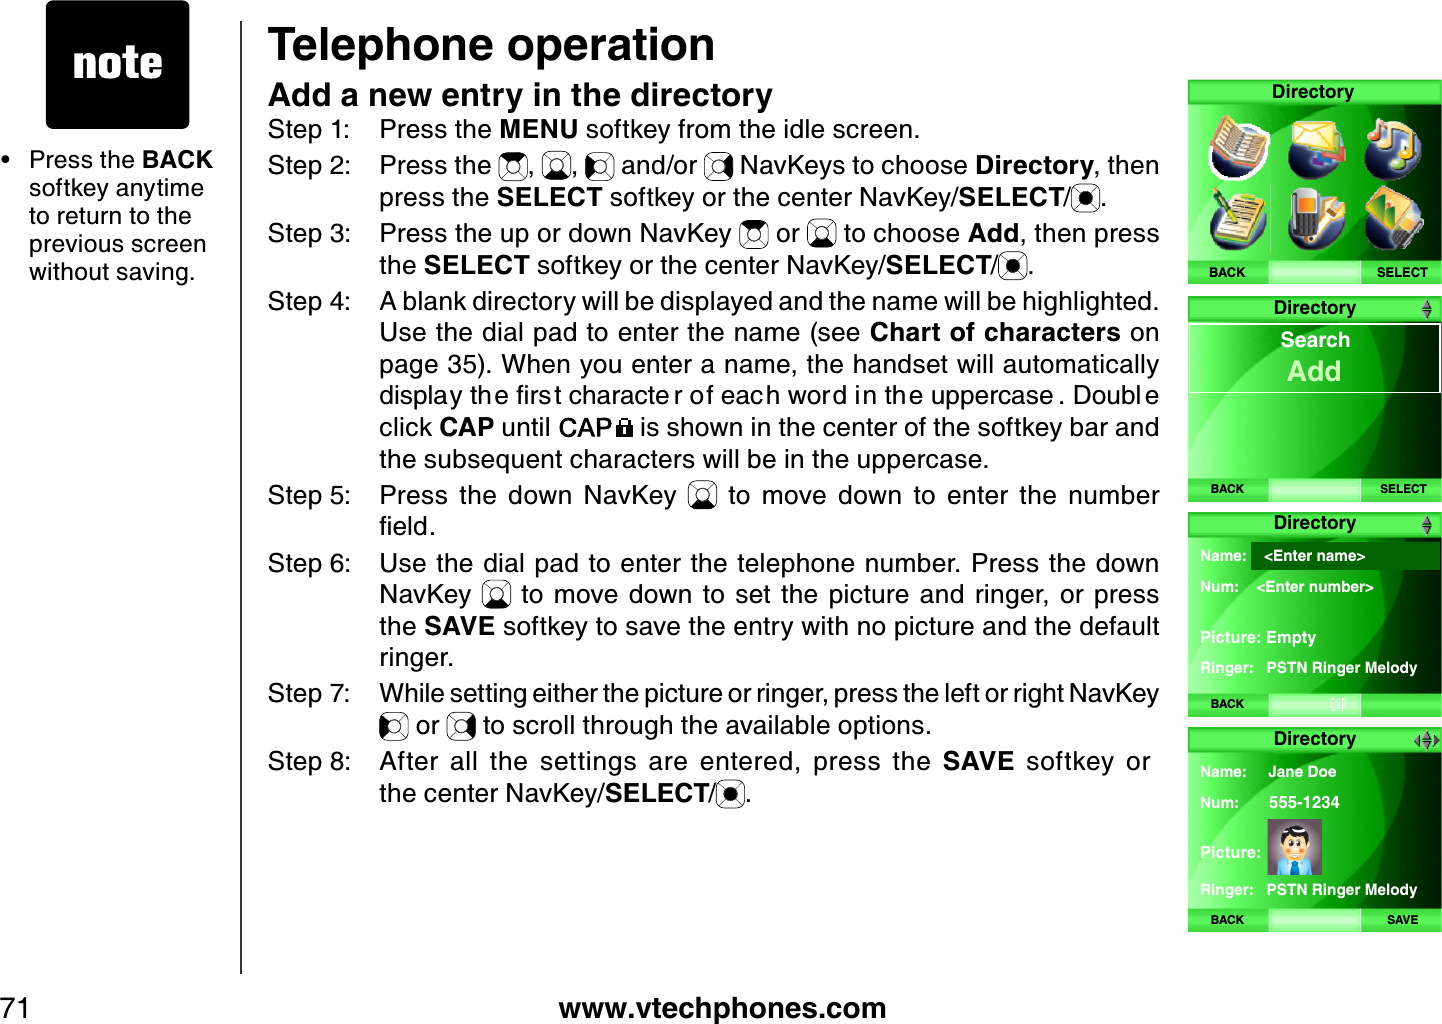 www.vtechphones.com71Telephone operationAdd a new entry in the directoryStep 1: Press the MENU softkey from the idle screen.Step 2: Press the  , ,  and/or   NavKeys to choose Directory, then press the SELECT softkey or the center NavKey/SELECT/.Step 3: Press the up or down NavKey   or   to choose Add, then press the SELECT softkey or the center NavKey/SELECT/.Step 4: A blank directory will be displayed and the name will be highlighted. Use the dial pad to enter the name (see Chart of characters on page 35). When you enter a name, the handset will automatically FKURNC[VJGſTUVEJCTCEVG TQHGCE JYQTFKPVJGWRRGTECUG &amp;QWDN Gclick CAP until   is shown in the center of the softkey bar and the subsequent characters will be in the uppercase. Step 5: Press  the  down  NavKey    to  move  down  to  enter  the  number ſGNFStep 6: Use the dial pad to enter the telephone number. Press the down NavKey    to  move down  to  set  the  picture  and ringer,  or  press the SAVE softkey to save the entry with no picture and the default ringer.Step 7: While setting either the picture or ringer, press the left or right NavKey  or   to scroll through the available options.                                                                        Step 8: After  all  the  settings  are  entered,  press  the  SAVE  softkey  or                   the center NavKey/SELECT/.Press the BACK softkey anytime to return to the previous screen without saving.•SELECTDirectoryBACKDirectoryBACK SELECT  SearchAddDirectoryBACKName:    &lt;Enter name&gt; Num:    &lt;Enter number&gt; Picture: EmptyRinger:   PSTN Ringer MelodyDirectoryBACK SAVEName:     Jane DoeNum: 555-1234Picture:Ringer:   PSTN Ringer Melody